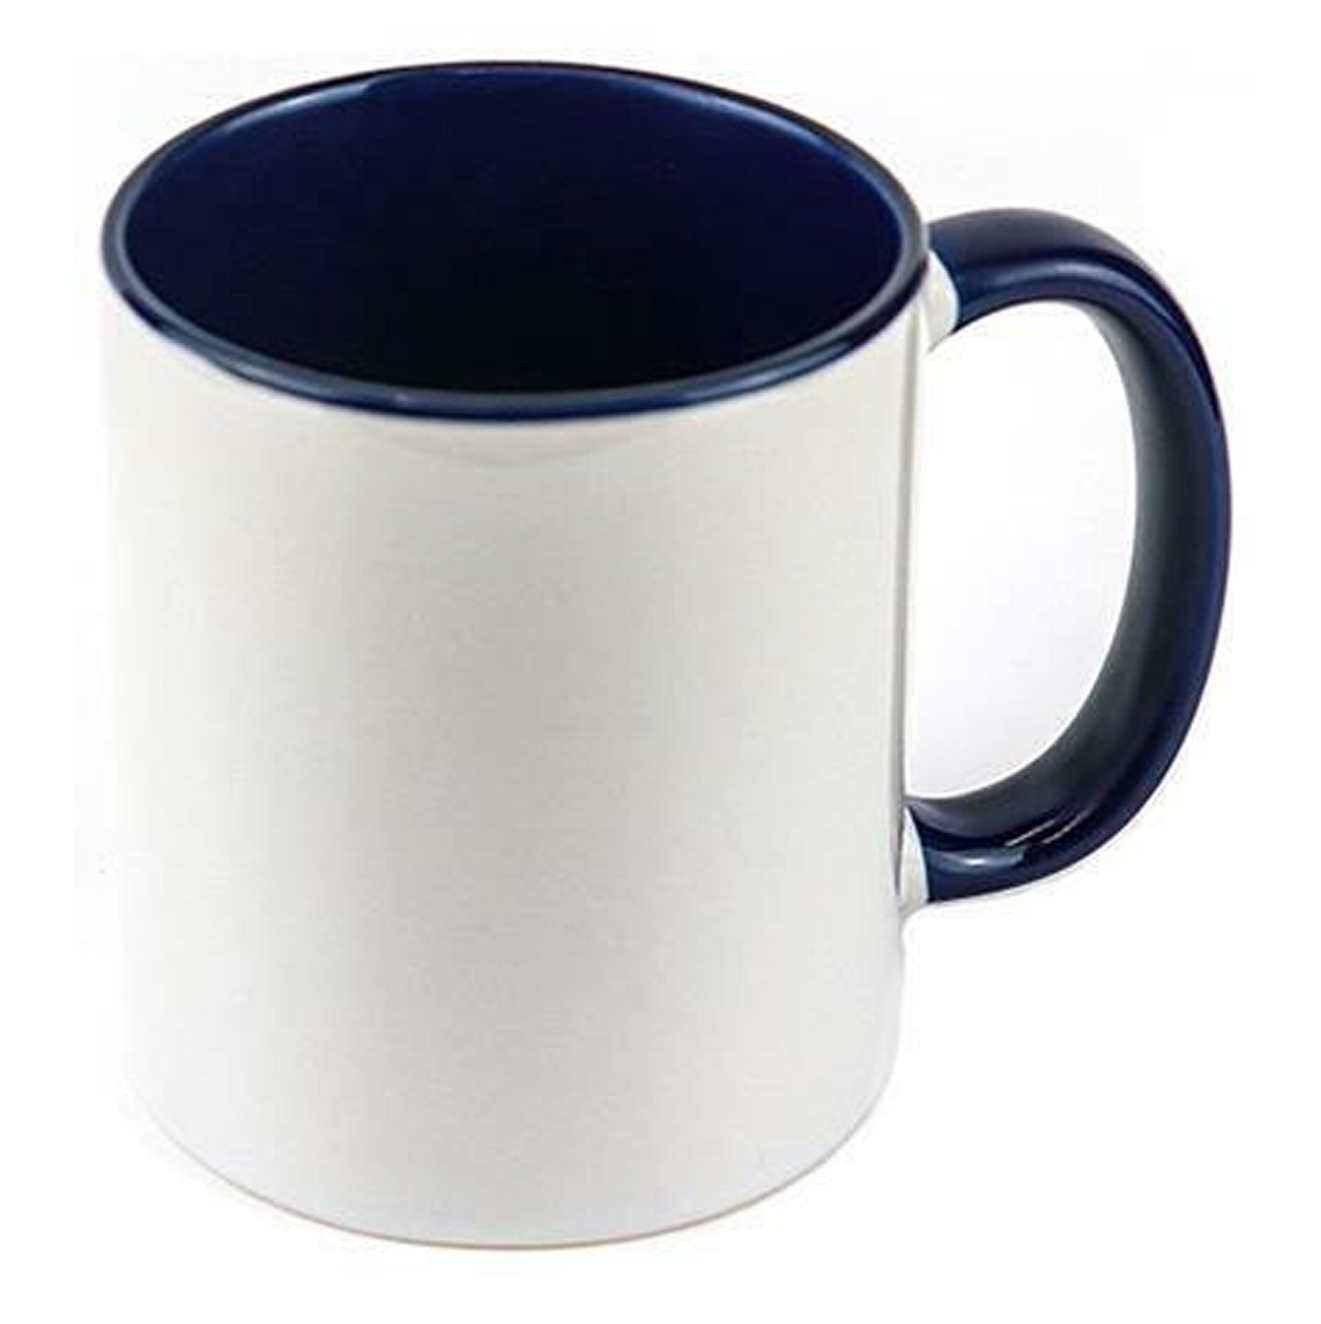 6 Pack-11 once White sublimation mugs inner color NAVY  and handle with reinforced foam box packaging